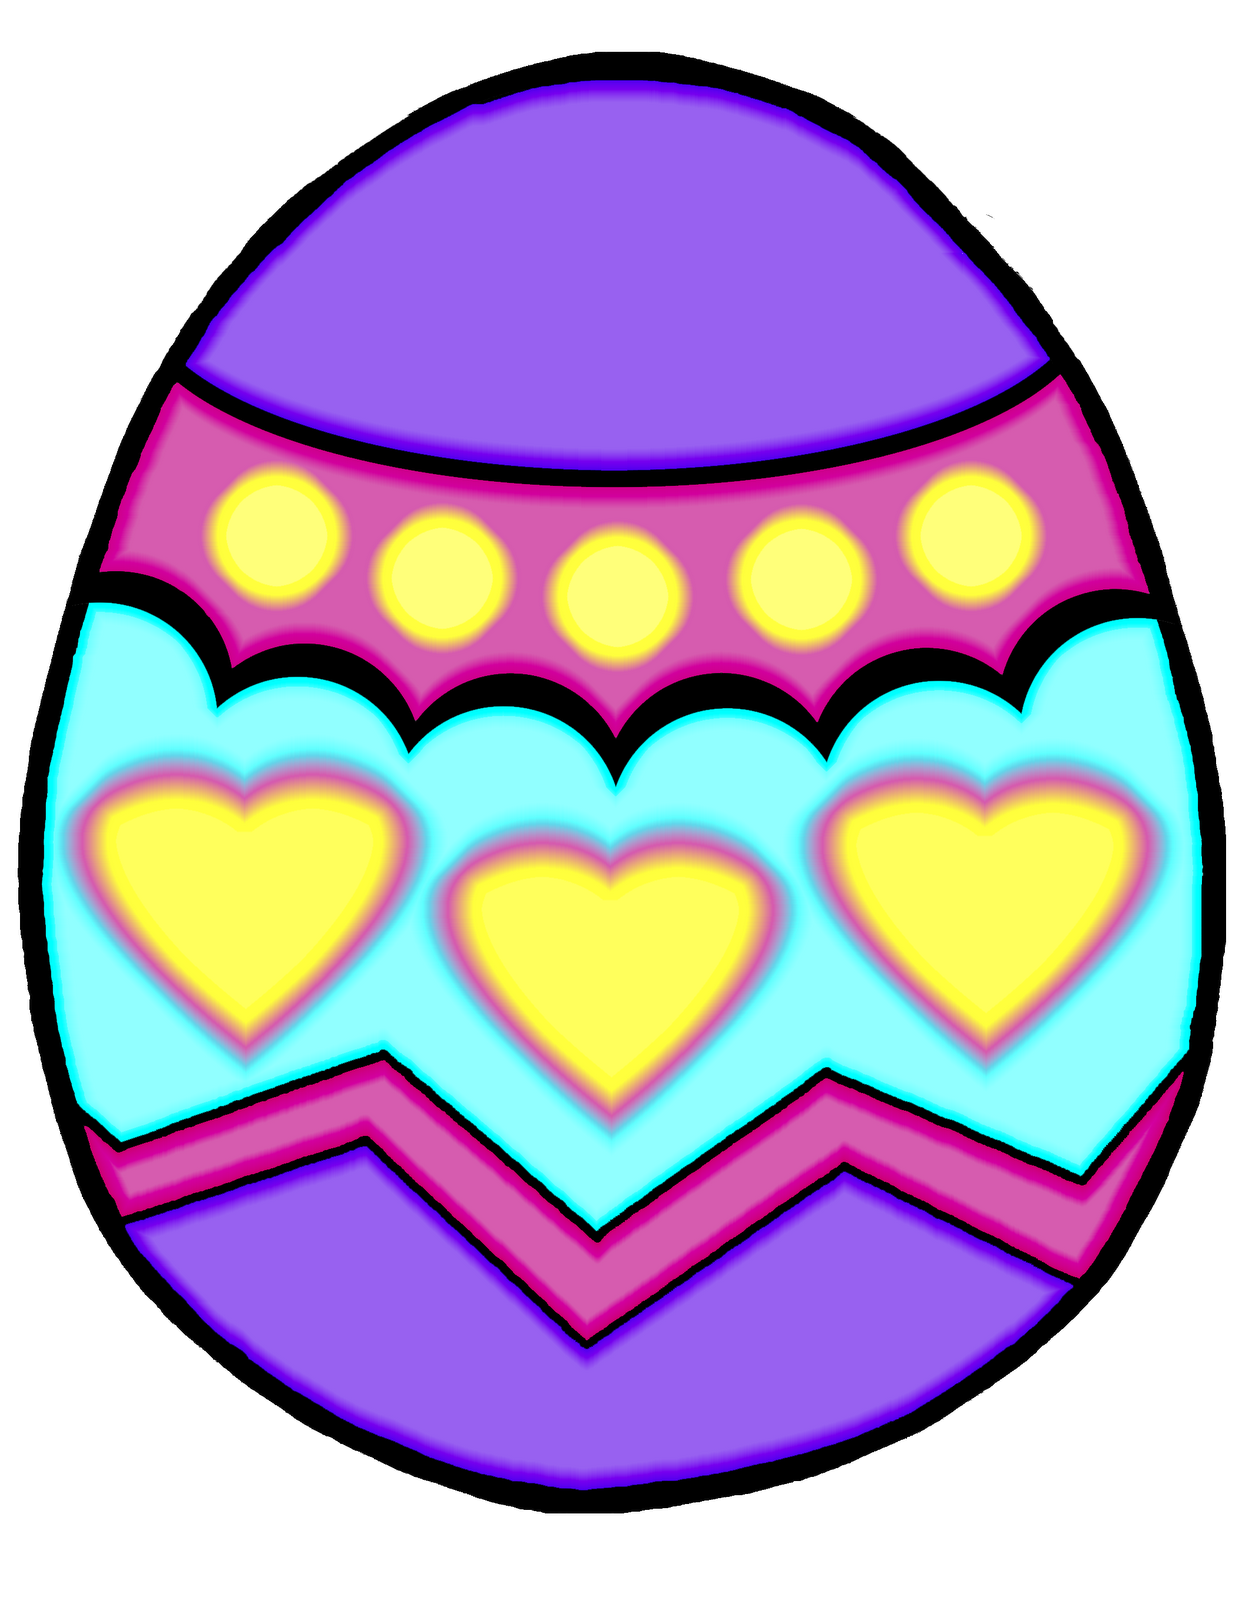 Easter Egg Clip Art Coloring Page | Clipart Panda - Free Clipart ...